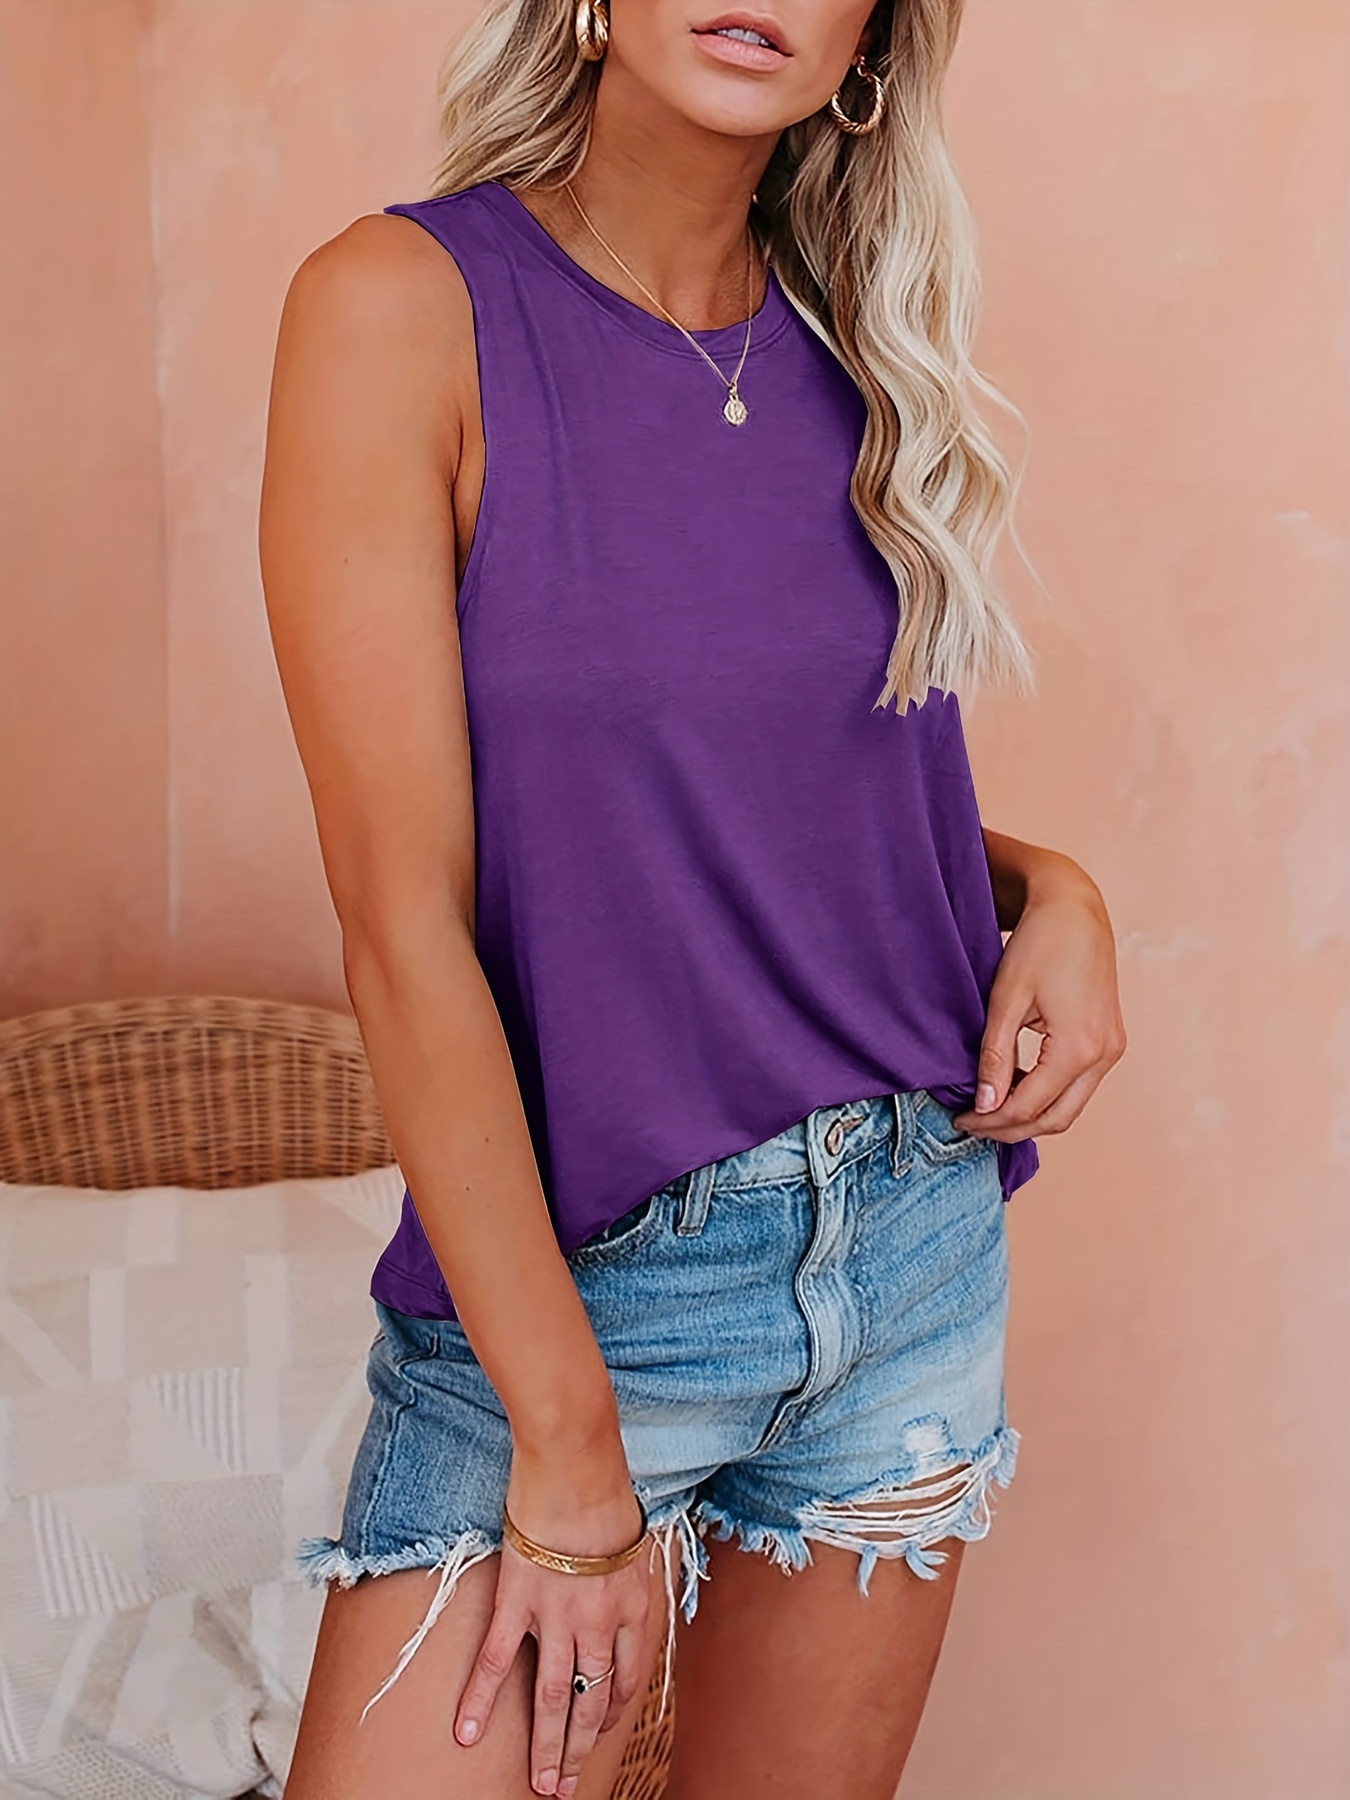 YDKZYMD Womens Tank Tops Color Block Crew Neck Summer T Shirt Fashion  Casual Loose Fit Shirts Flowy Camis Sleeveless Blouses Purple 3XL 